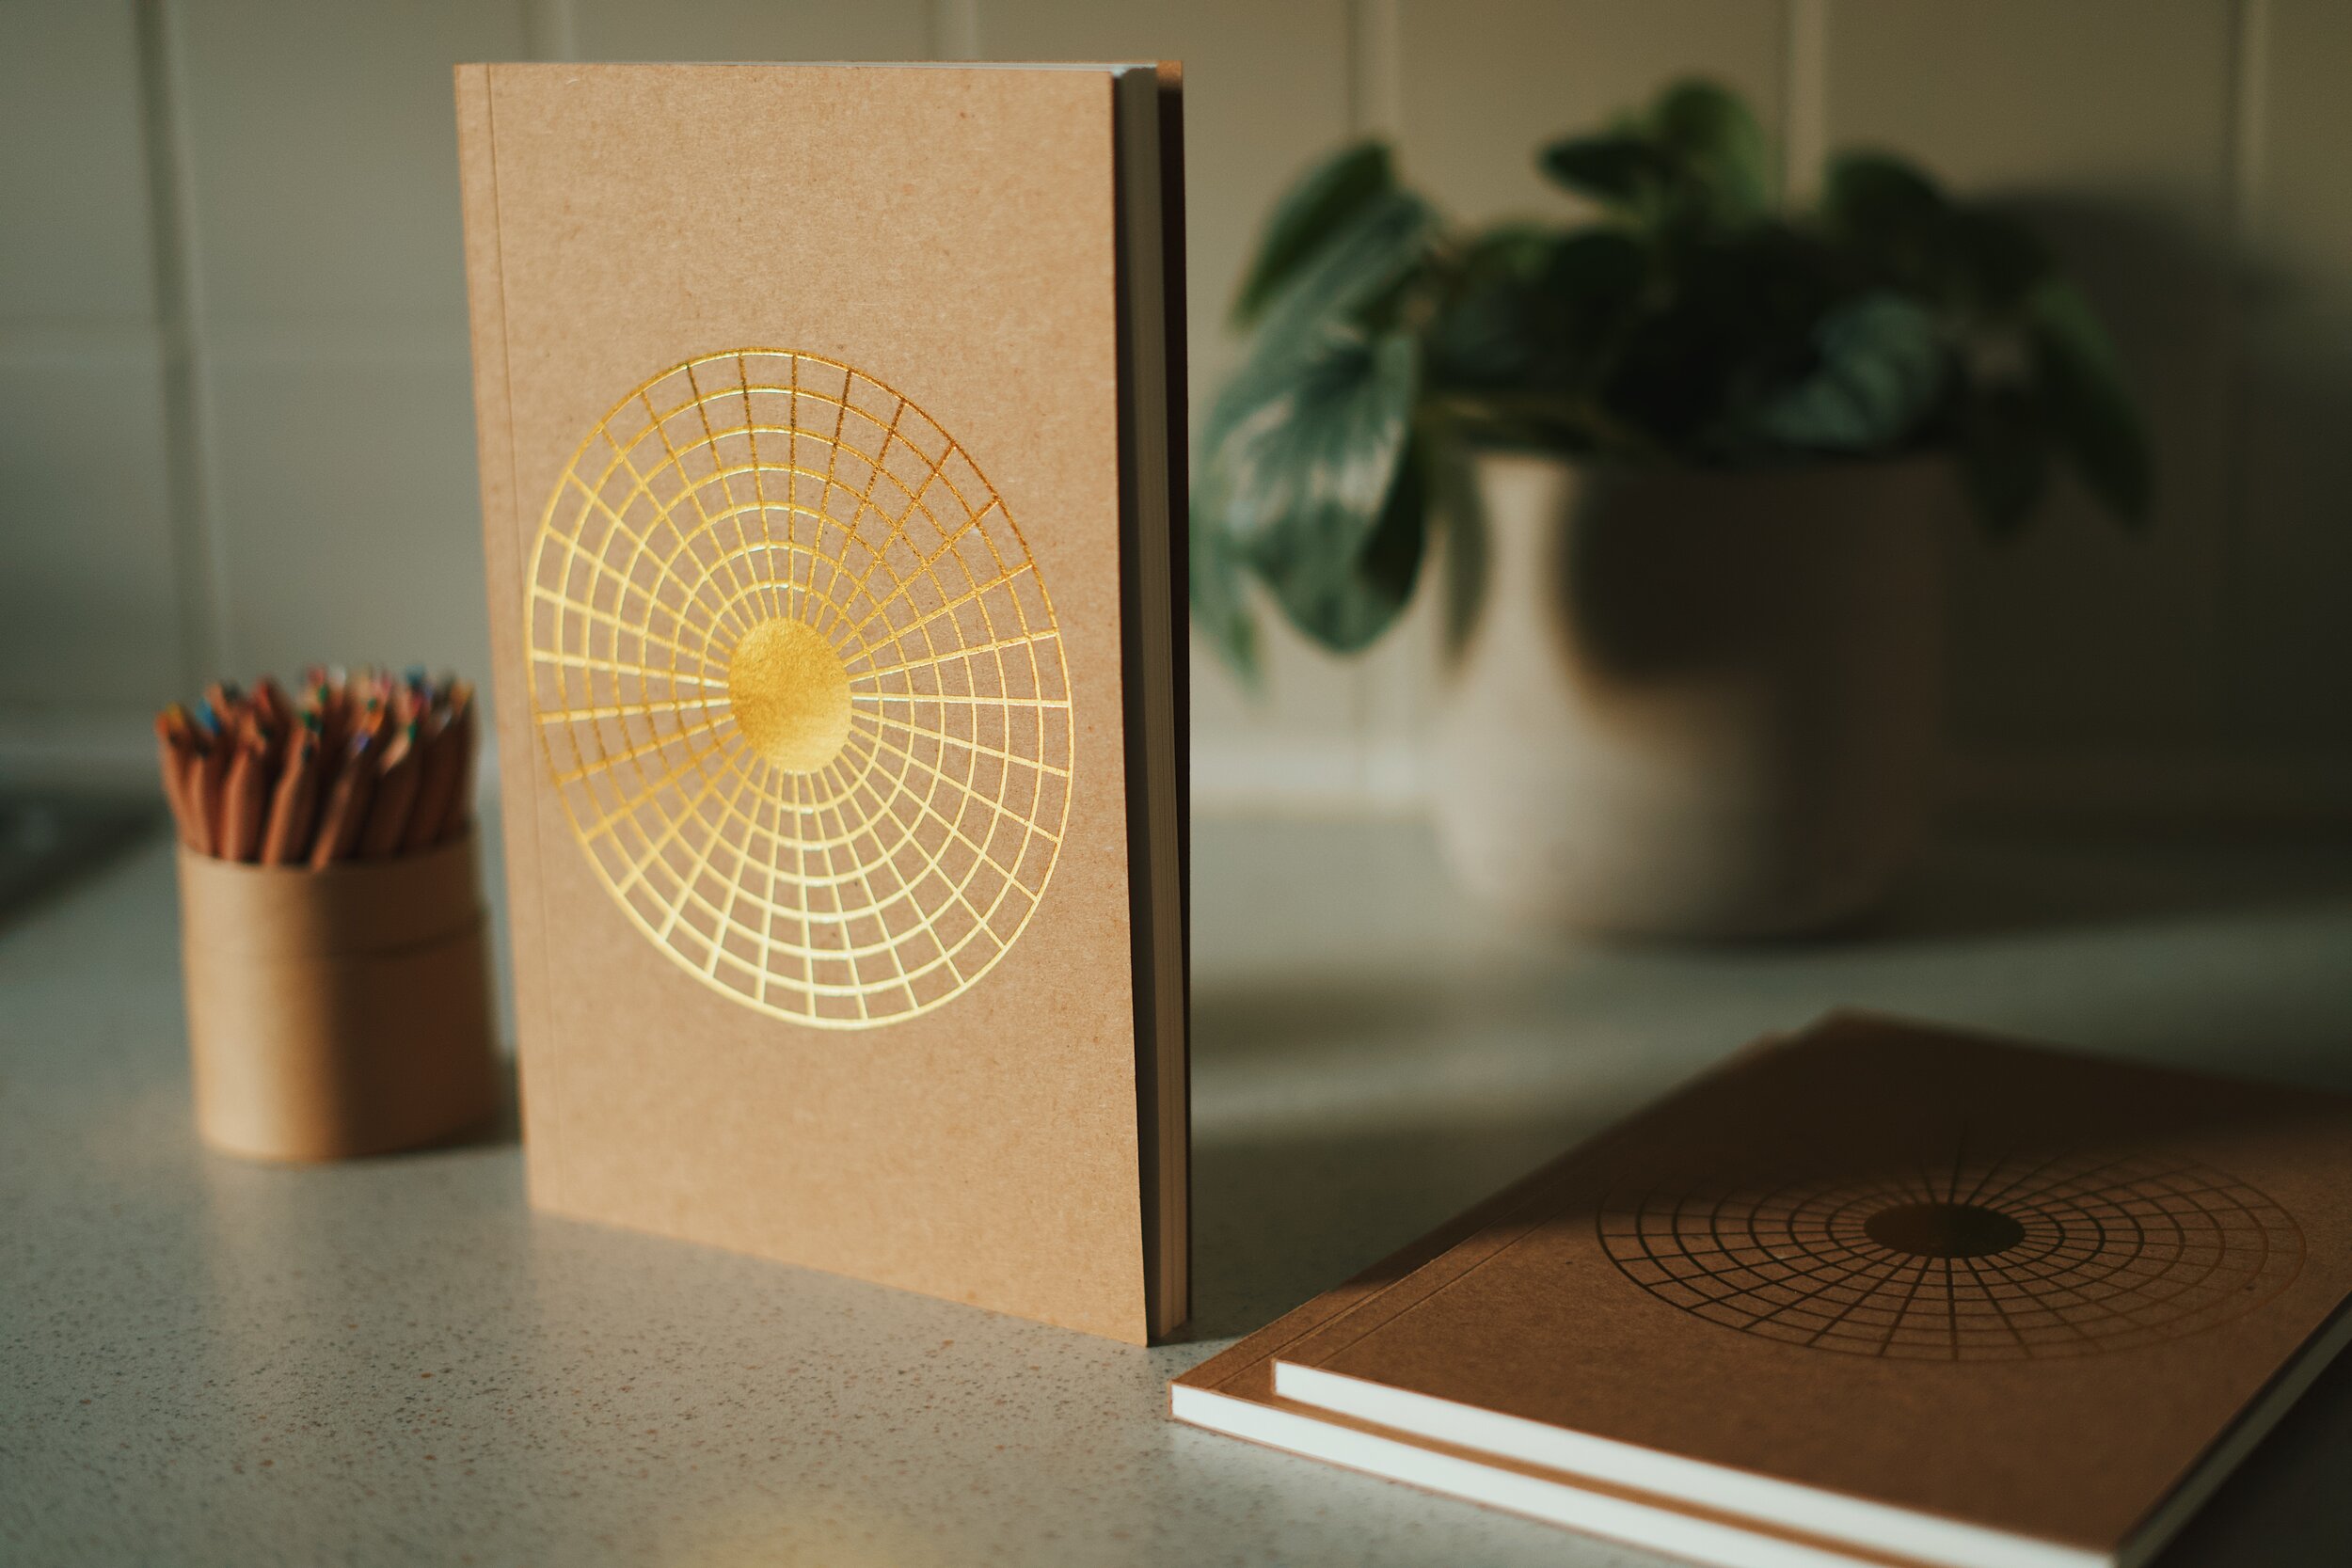 A photo of the Resilience Journal publication- three journals sit on a counter, one of them is standing up. The cover has a gold stamp in the shape of the circular data visualization framework. There are colored pencils to the left of the journal and leafy potted plant in the background.